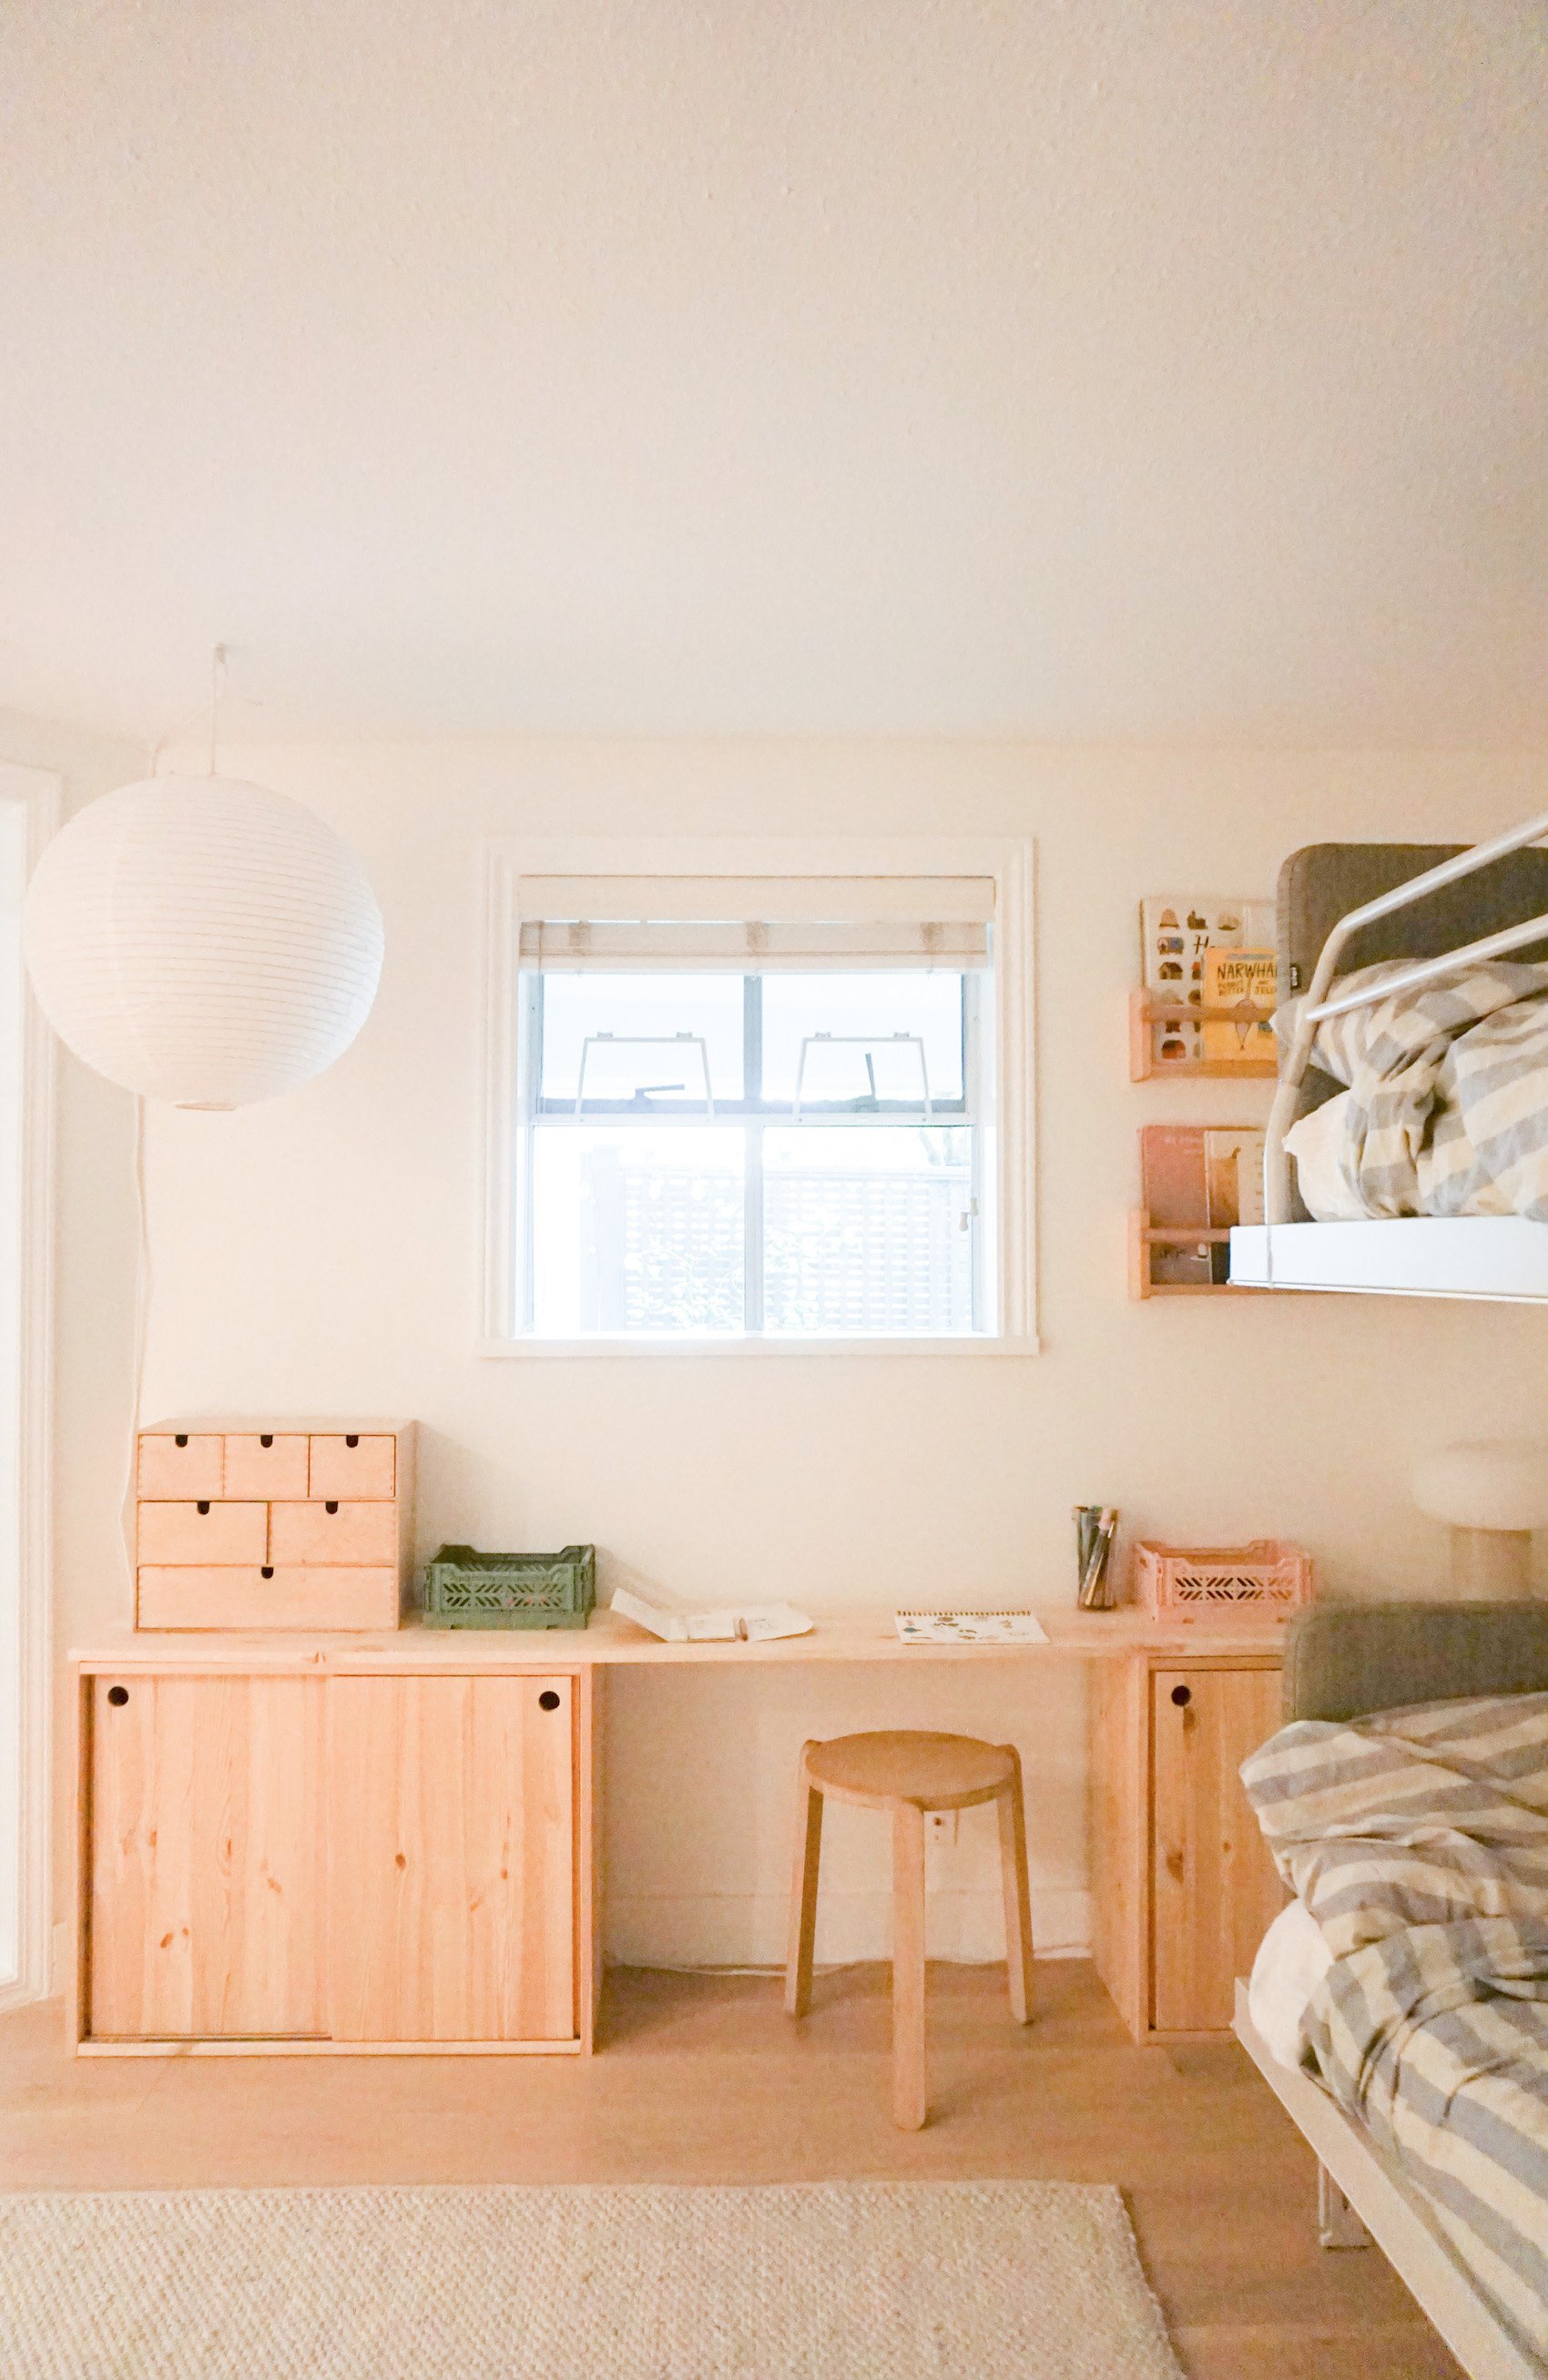 16 IKEA Storage Ideas for Small Spaces